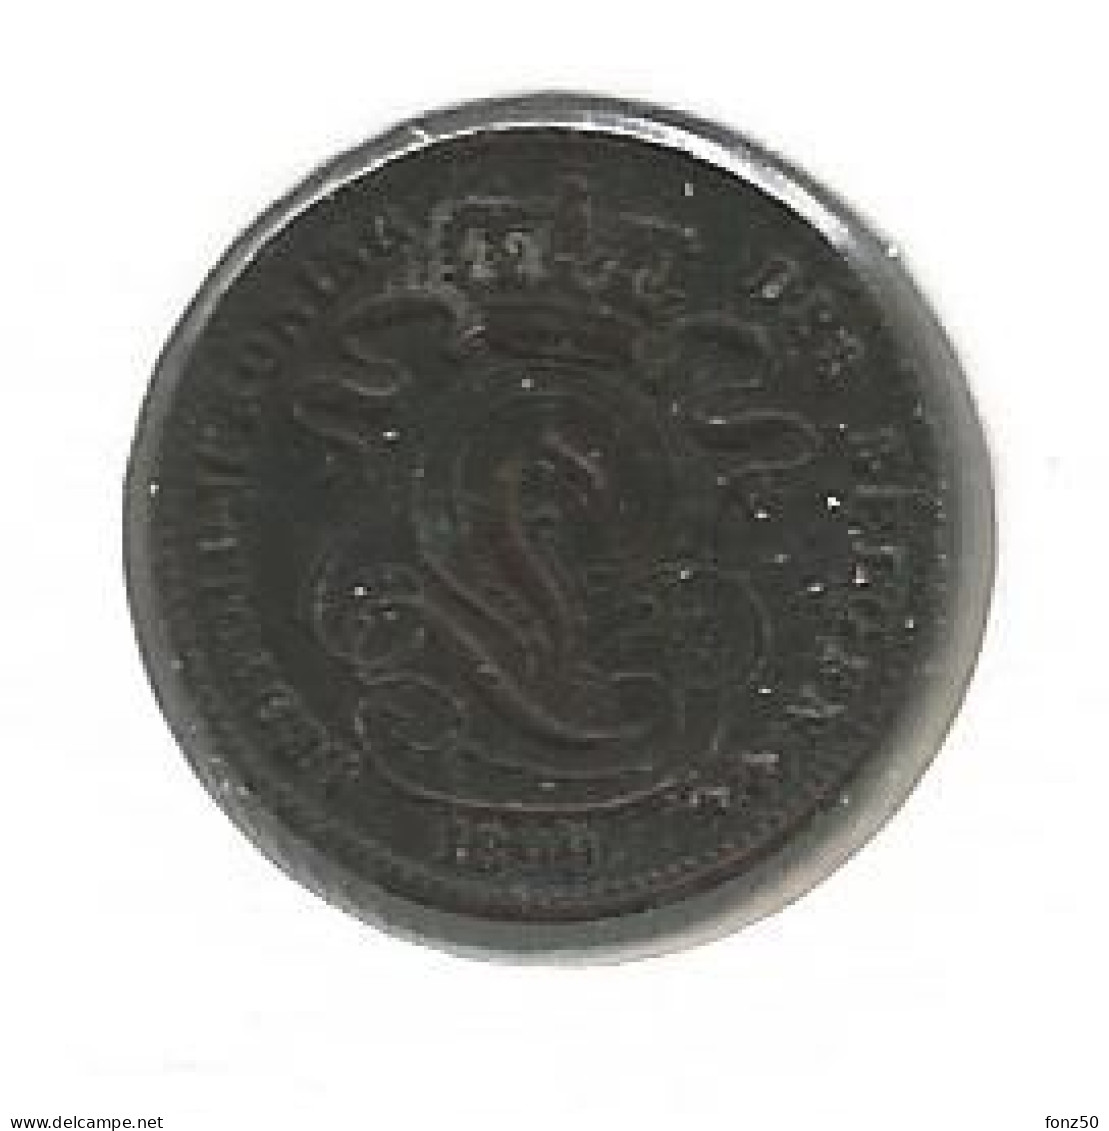 LEOPOLD II * 1 Cent 1899 Vlaams * F D C * Nr 12925 - 1 Centime